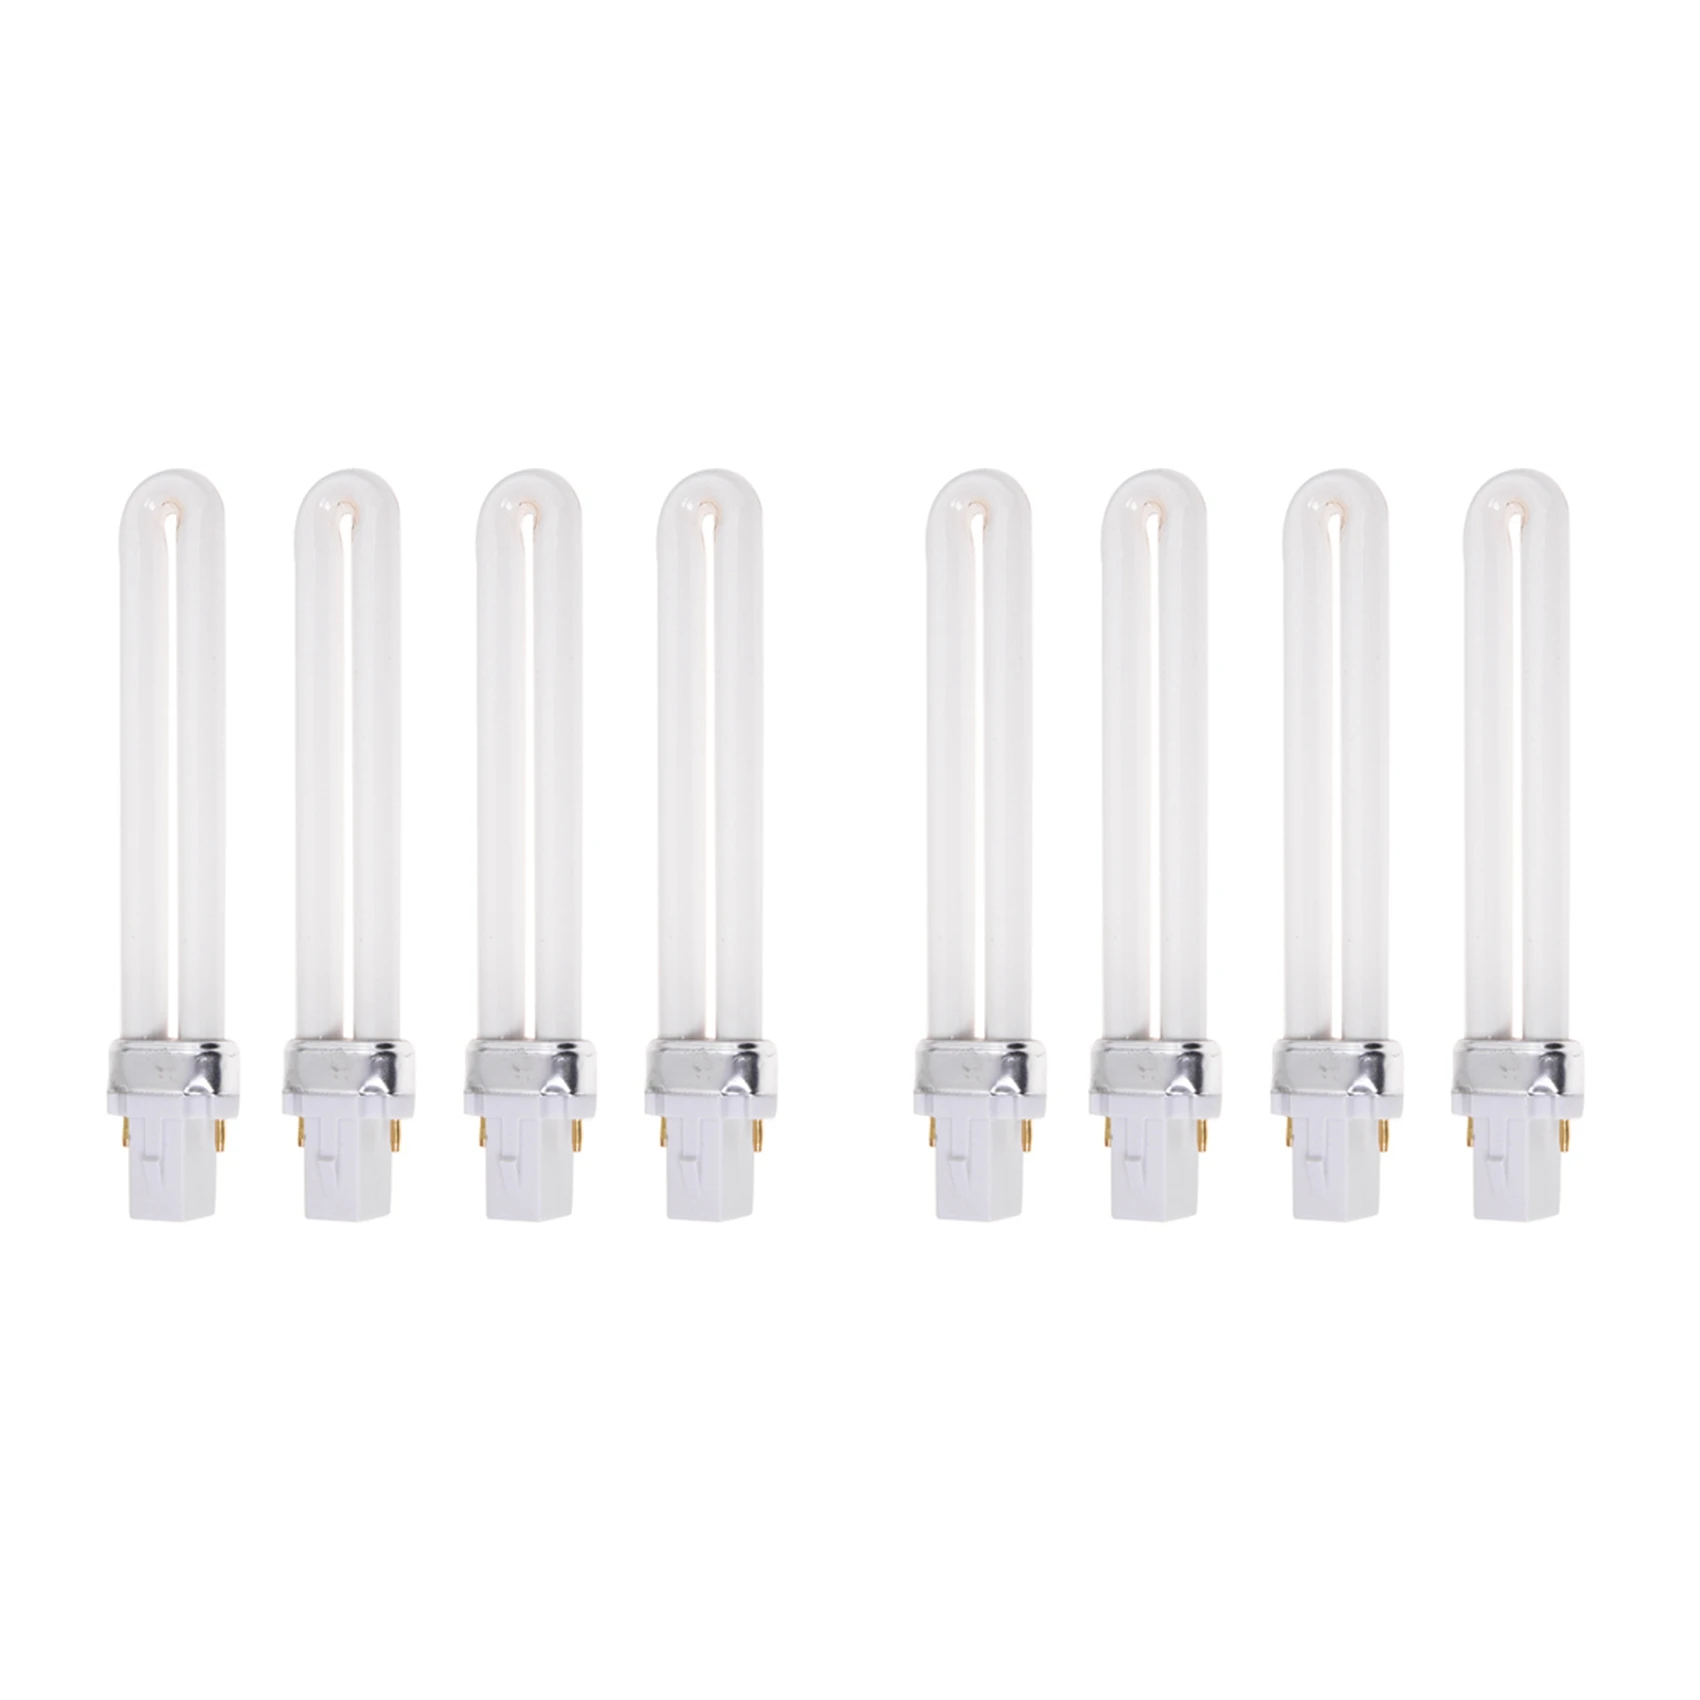 

8 x 9W Nail UV Light Bulb Tube Replacement for 36W UV Curing Lamp Dryer